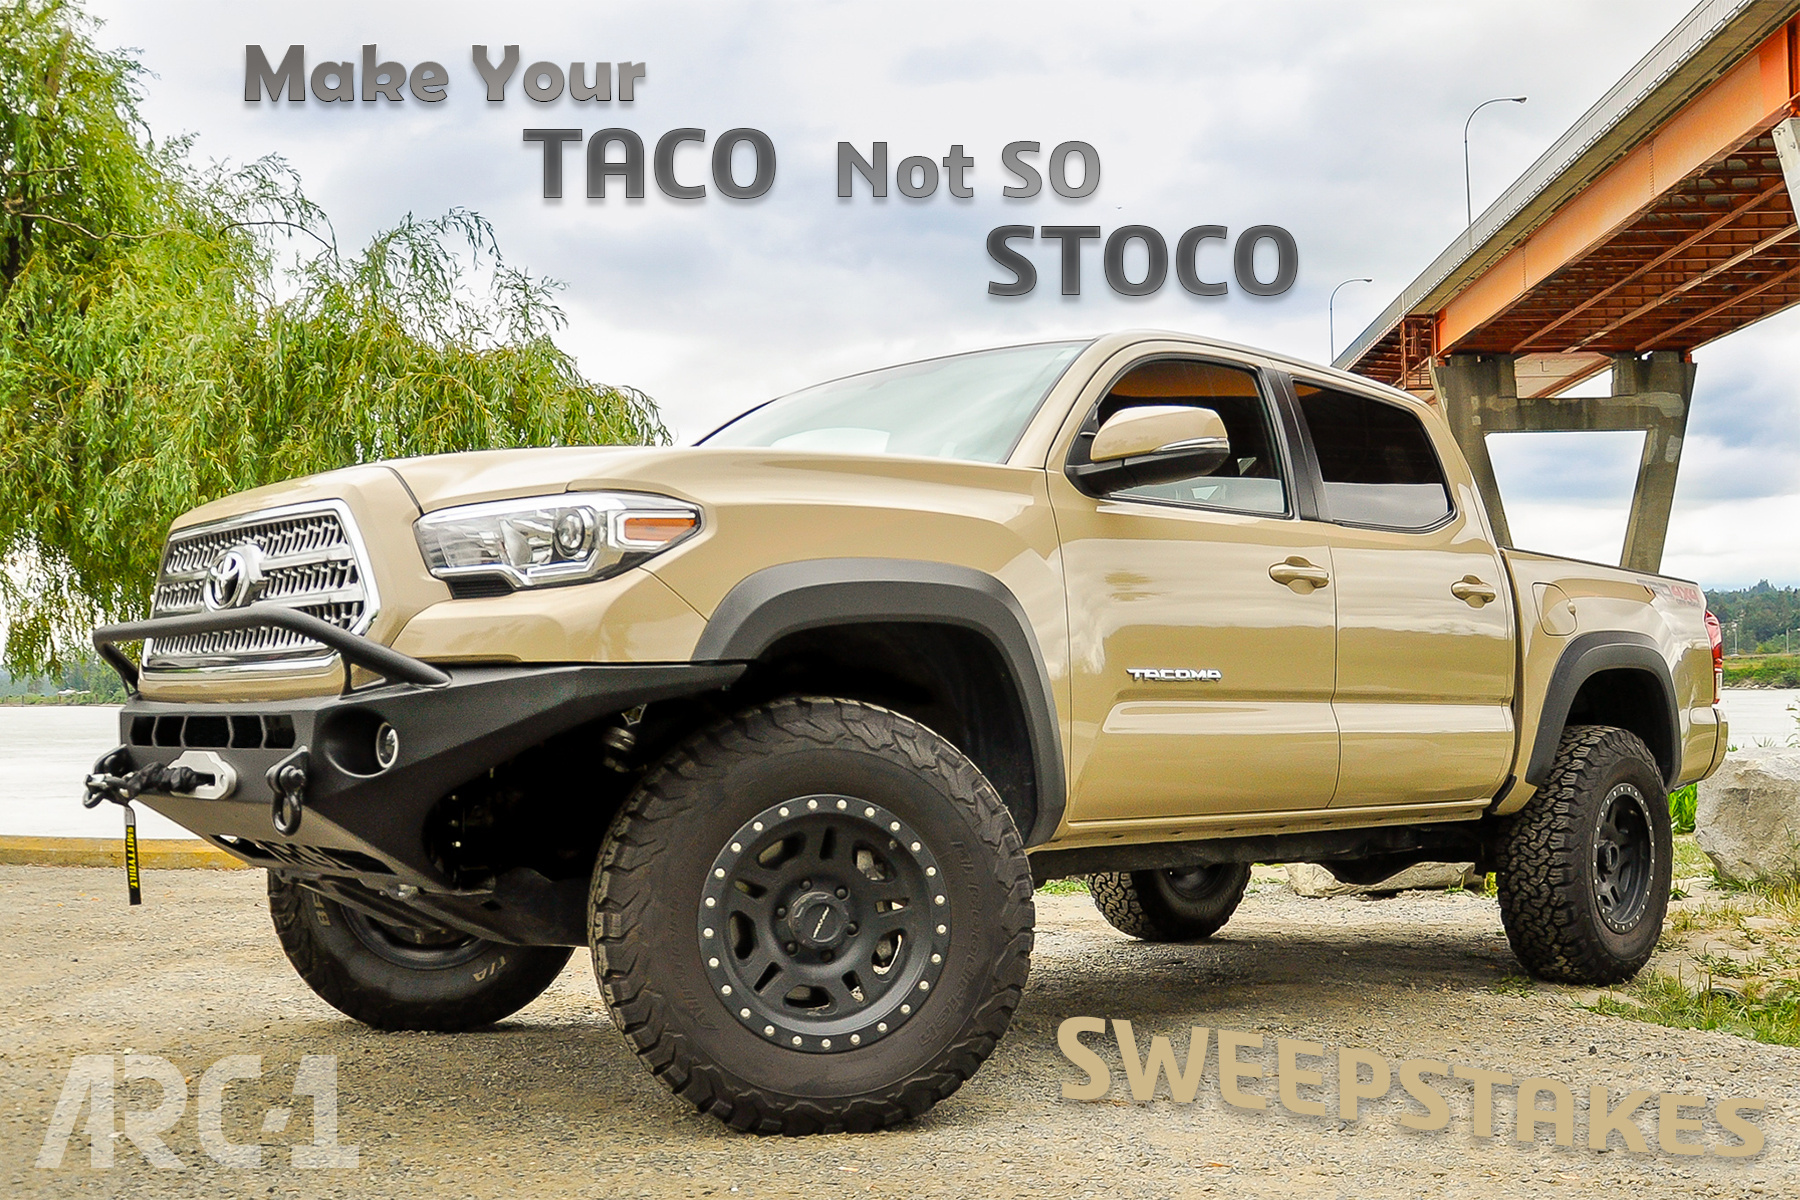 Make Your Taco Not So Stocko Sweepstakes (IMG2) - 19-07-25.jpg